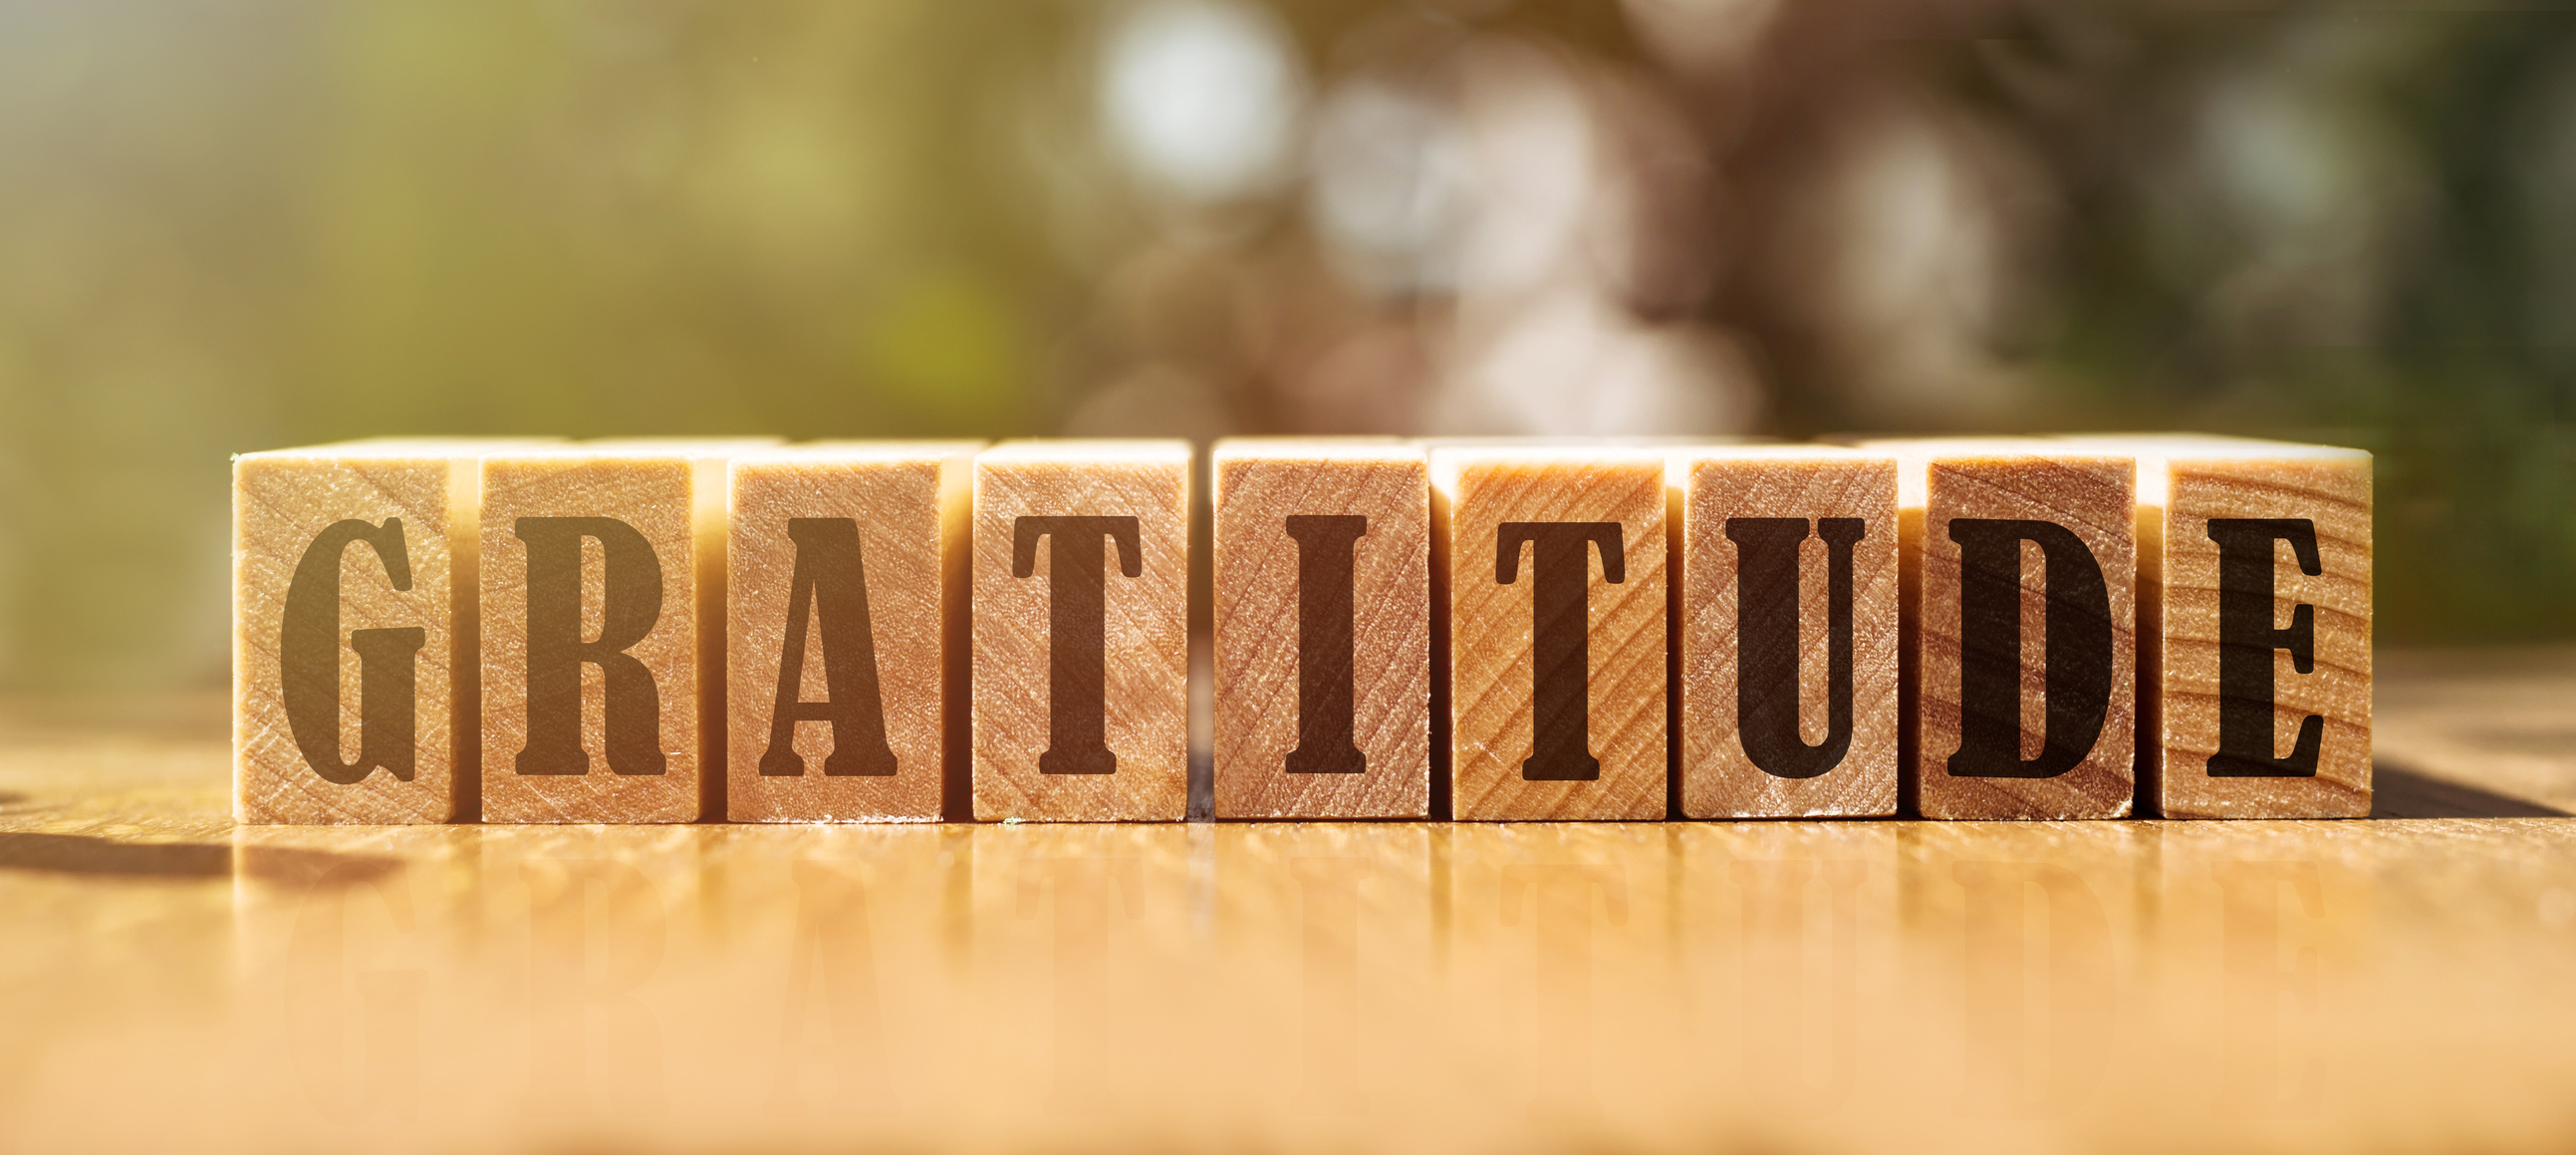 Practicing Gratitude for Better Health and Well-Being